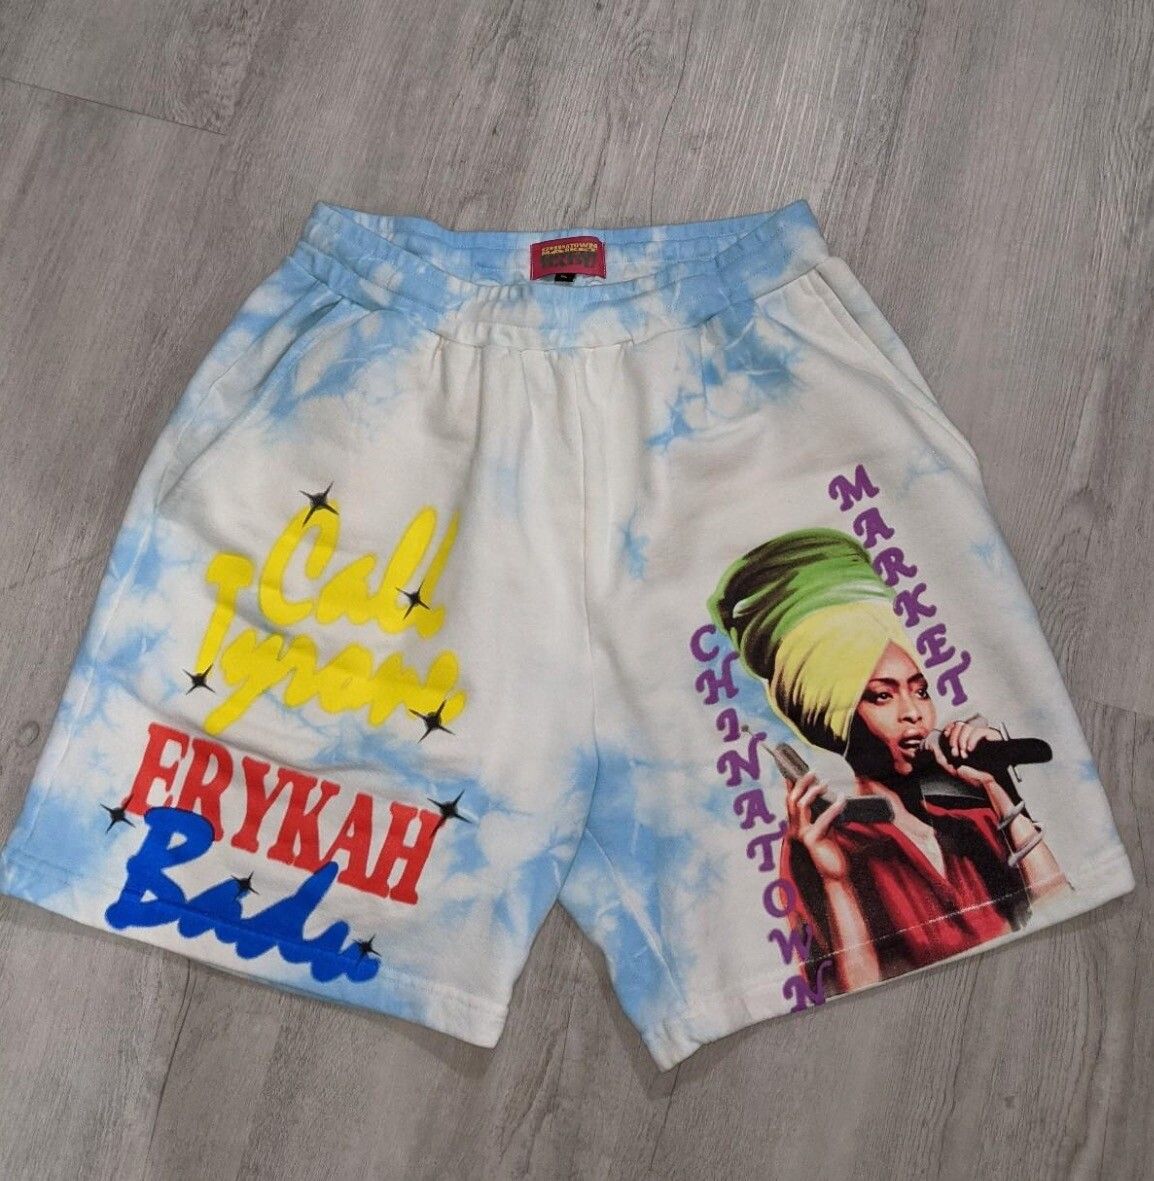 Market Erykah Badu/Call Tyrone x CTM Collection Size US 36 / EU 52 - 1 Preview